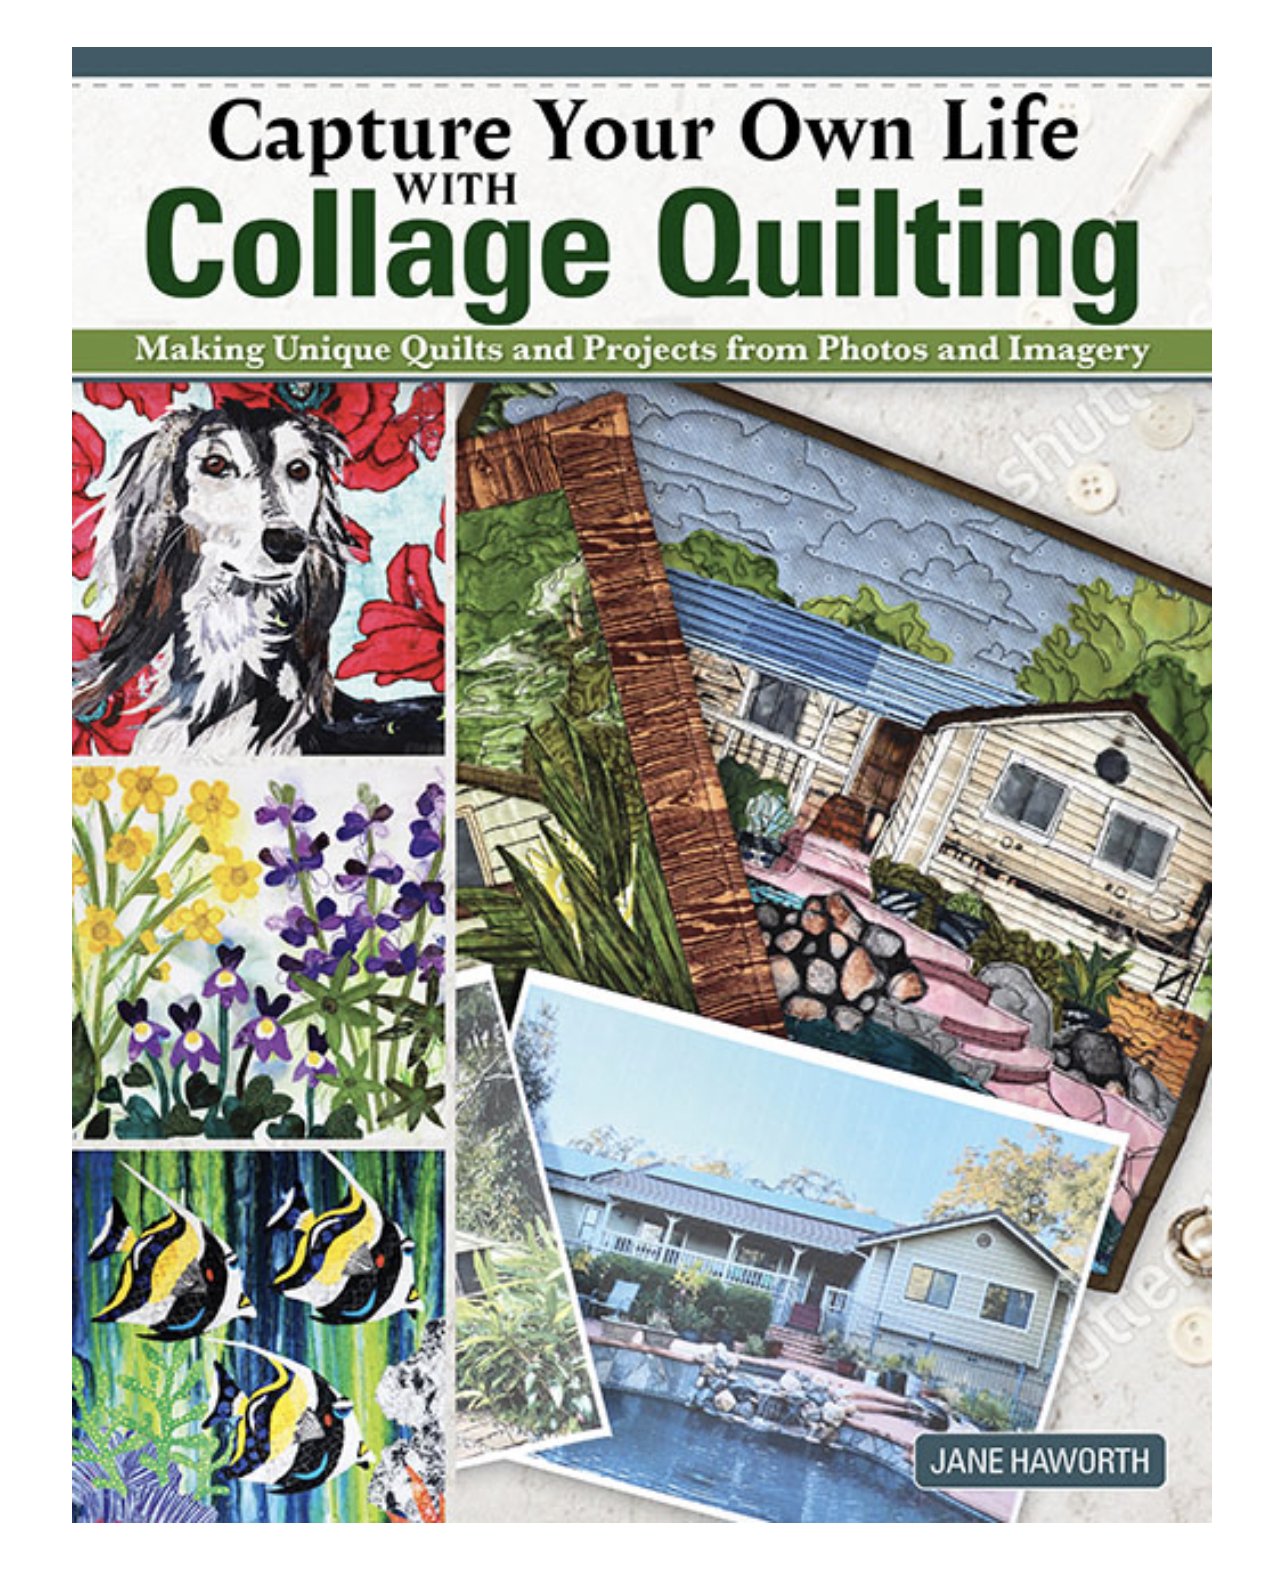 Capture your own Life with Collage Quilting Jane Haworth.jpeg